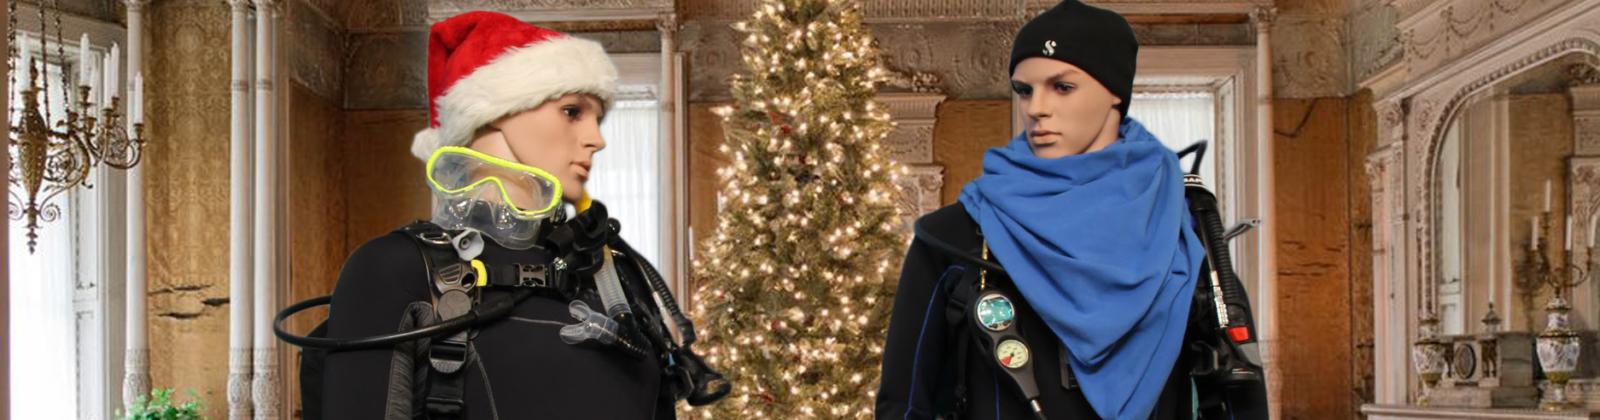 Two divers in festive wear in front of a decorated tree